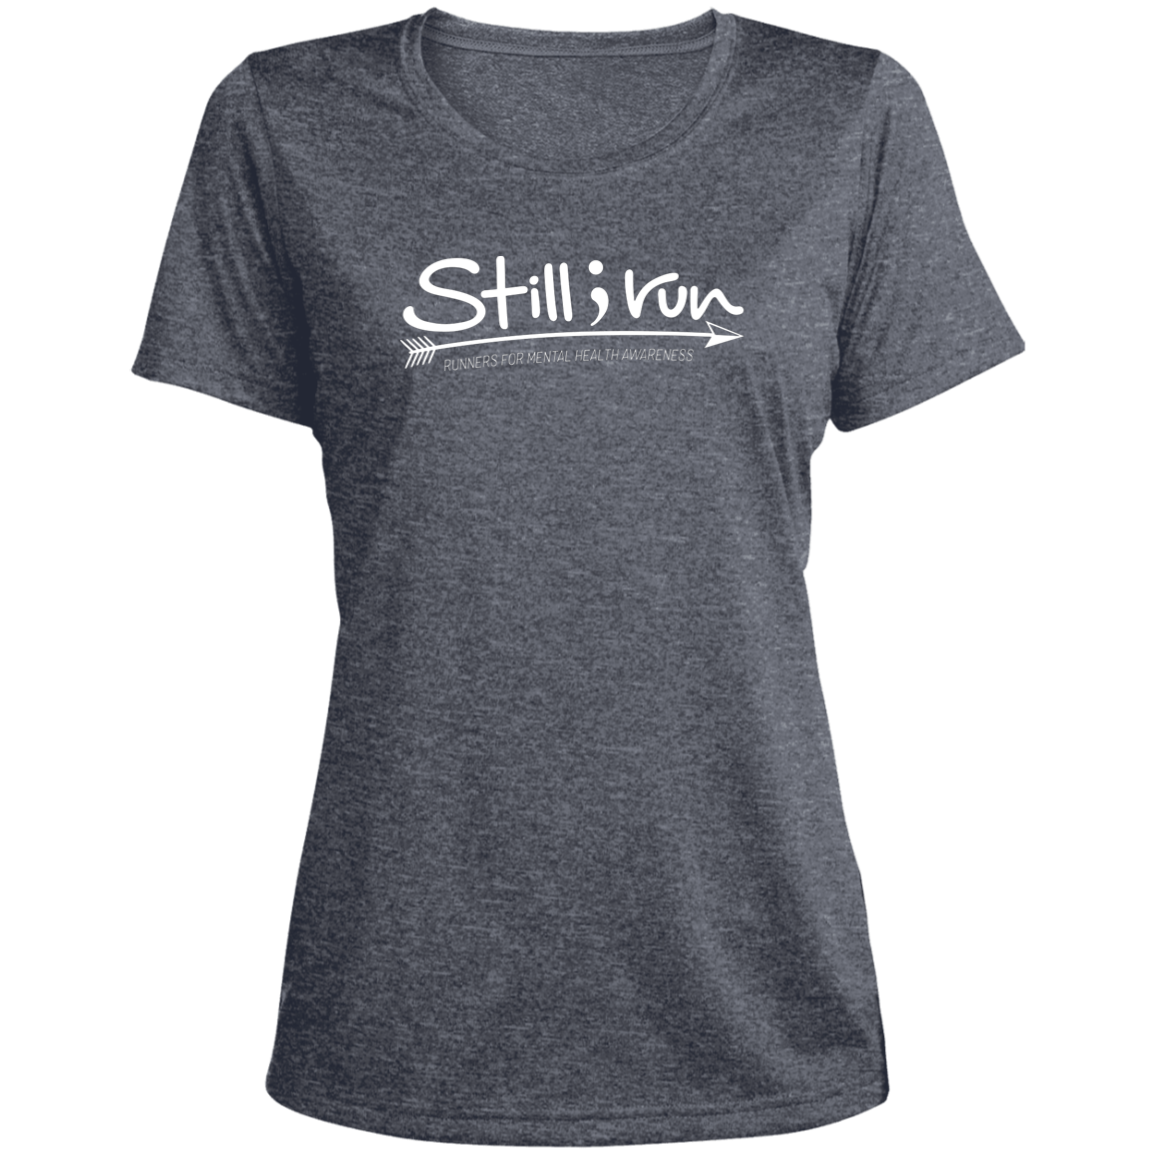 Still I Run - Fitted Heather Scoop Neck Performance Tee